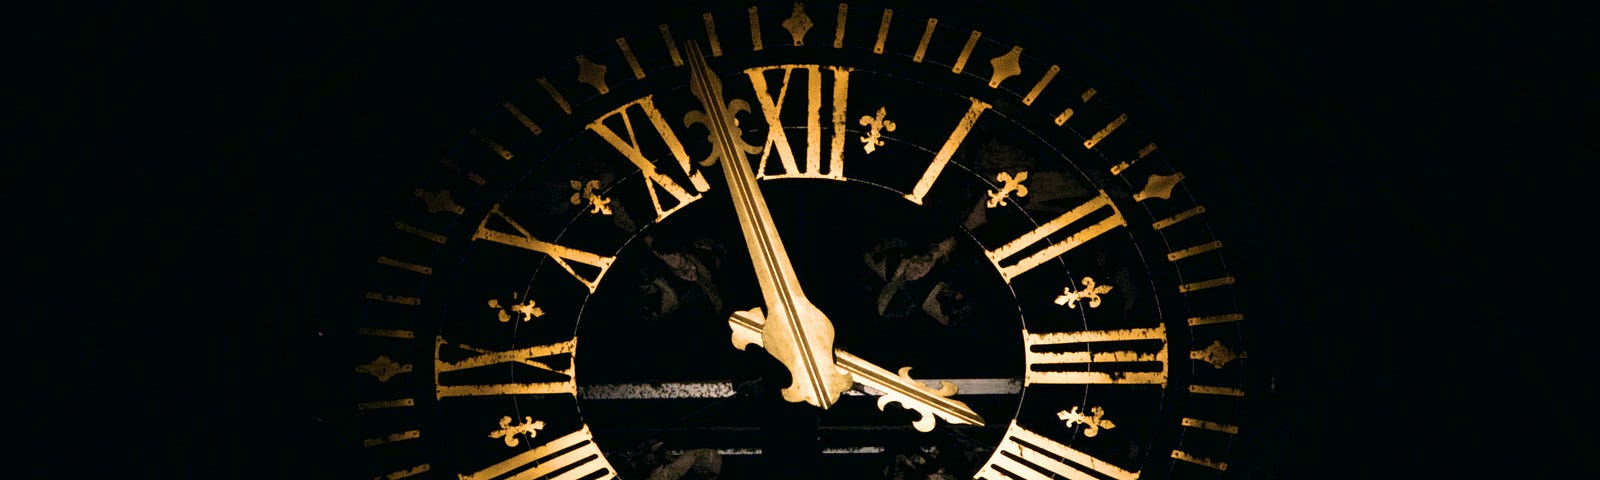 clock with bronze or gold letters and hands